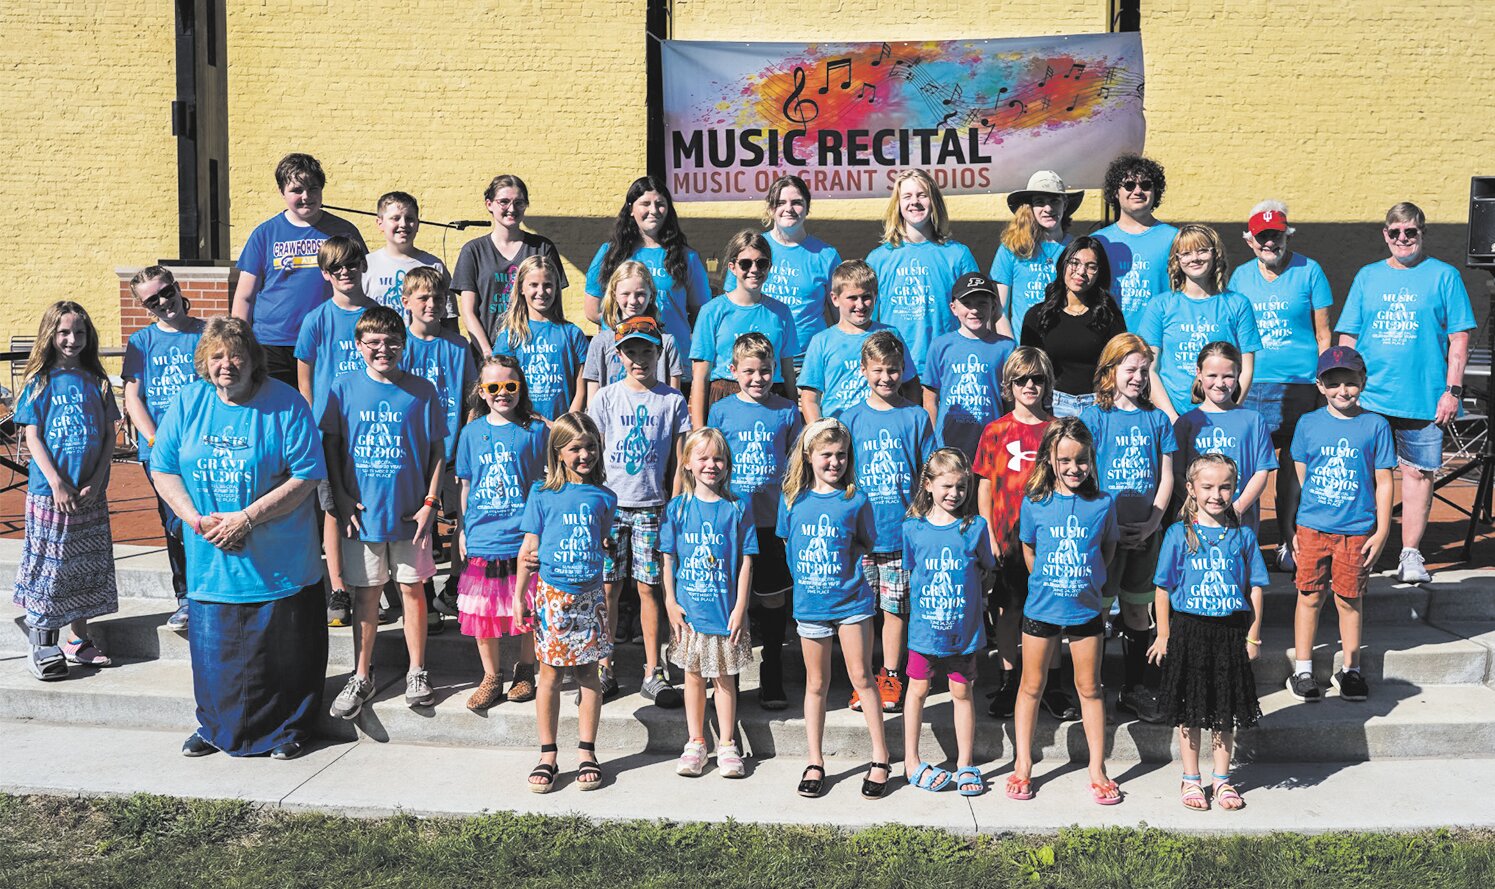 Music on Grant Studios held its annual Fall Recital on Sept. 30 at Pike Place in downtown Crawfordsville. Students played a variety of instruments including voice, piano, guitar, violin, double bass, ukulele, trumpet, cornet, trombone, tuba and baritone sax. Pictured are, front row, Collins Bechtel, Lucy Weedman, Cora Vanderhoof, Haley Myers, Clara Brown and Korbin Leonard; second row, Debbie Turner, Carter Hodges, Pearl Weedman, Liam Bernhardt, Conner Brown, Nolan Sizemore, Crew Rose, Ozzie Rose, Avery Sarver and Fletcher Petrie; third row, Katherine Cherry, Madeline Nelson, August Ashment, Jaxon Cohee, Evelynn Ashburn, Prudence Madsen, Paige Rose, Graham Petrie, Angelina Leon-Leyva, Rilynn Hansen; and back row, Jackson Persack, Gage Frazee, Lydia VanHuysen, Eleanor Hessler, Lindsey, Brendan and Jordan Young, Noah Warren, Barb Wilson and Pamela Myers, instructors. Not pictured are Beth Siple, Mathew and William Hershberger, Aarav Desai, Krista Myers and Zachary Hicks.